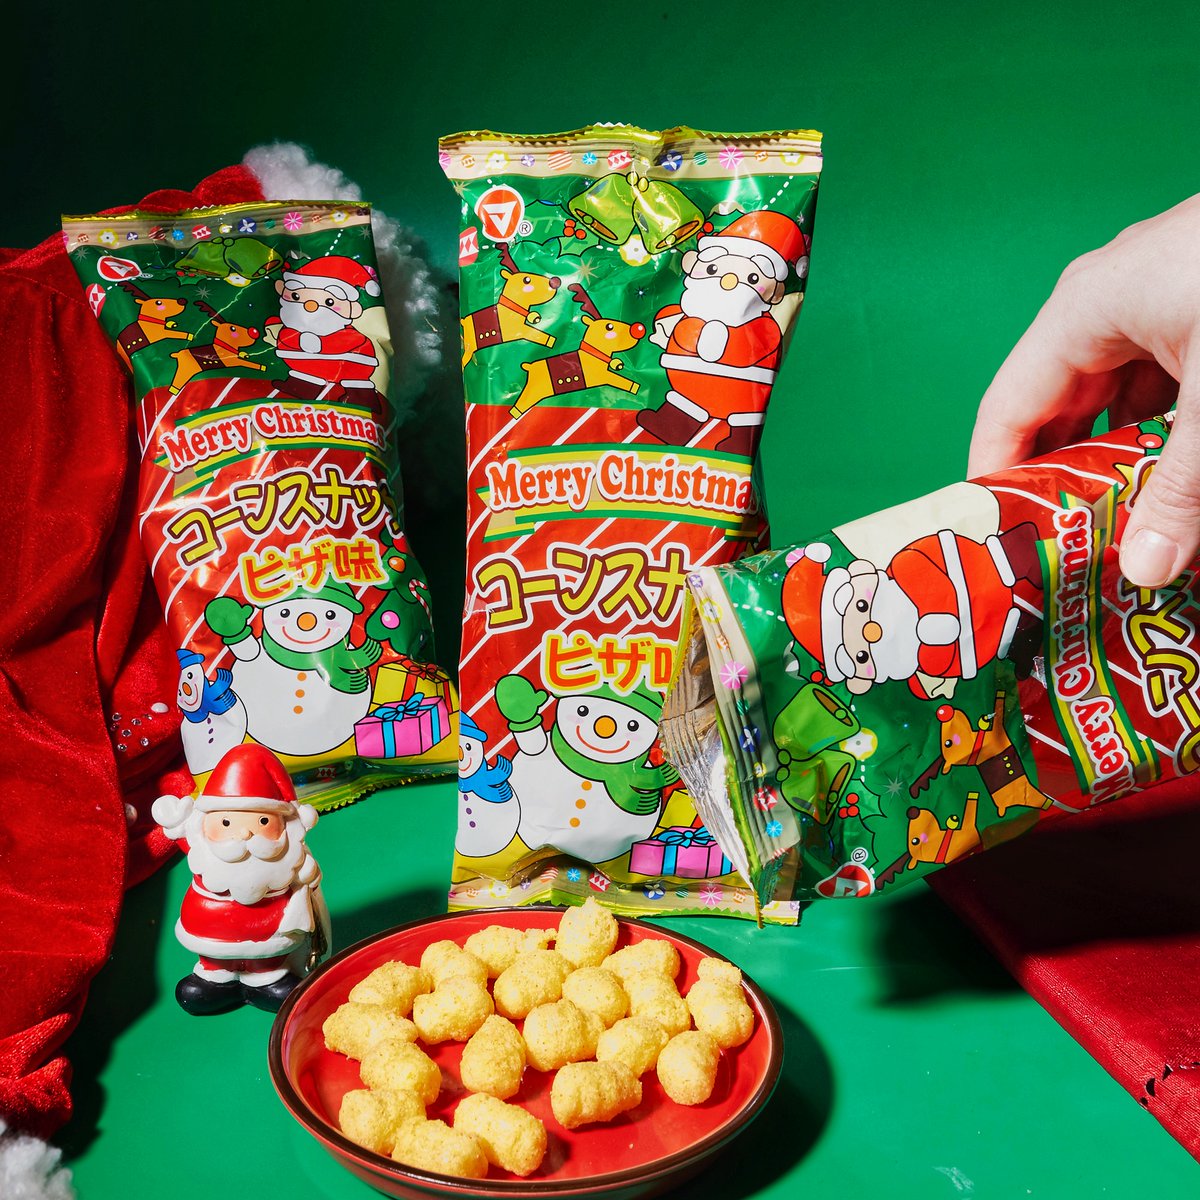 Milk & cookies, step aside! Santa's got a new fave snack!🎅 Whether it's for Santa or your Christmas party, these corn snacks are sure to be a holiday showstopper!🌽✨ Get these treats + more in the Snacktacular Christmas box by 12/15!🎄 🔗tokyotreat.com/subscribe